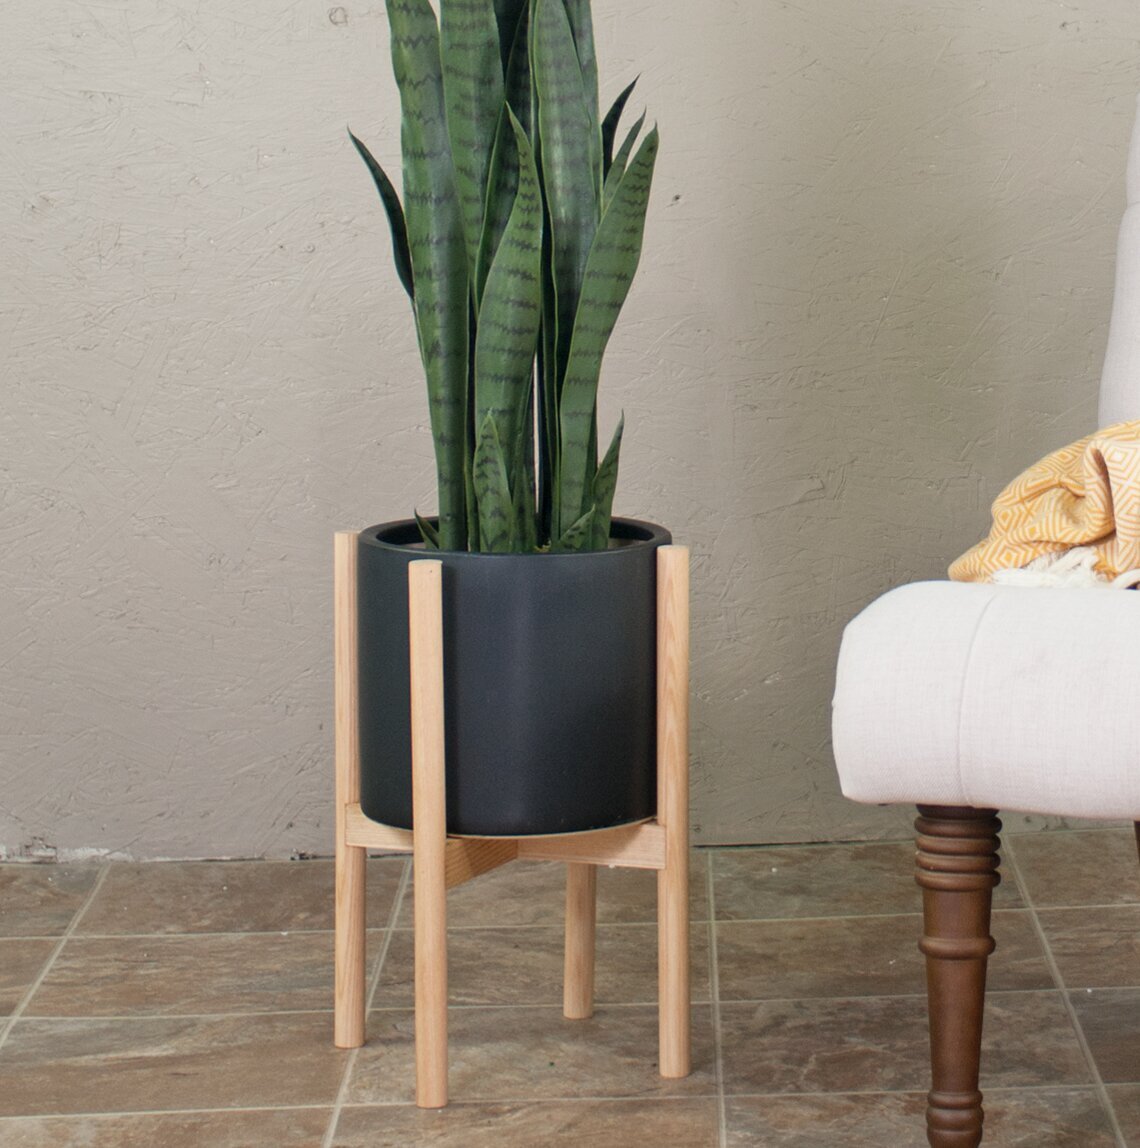 Tall ceramic planter with wooden stand